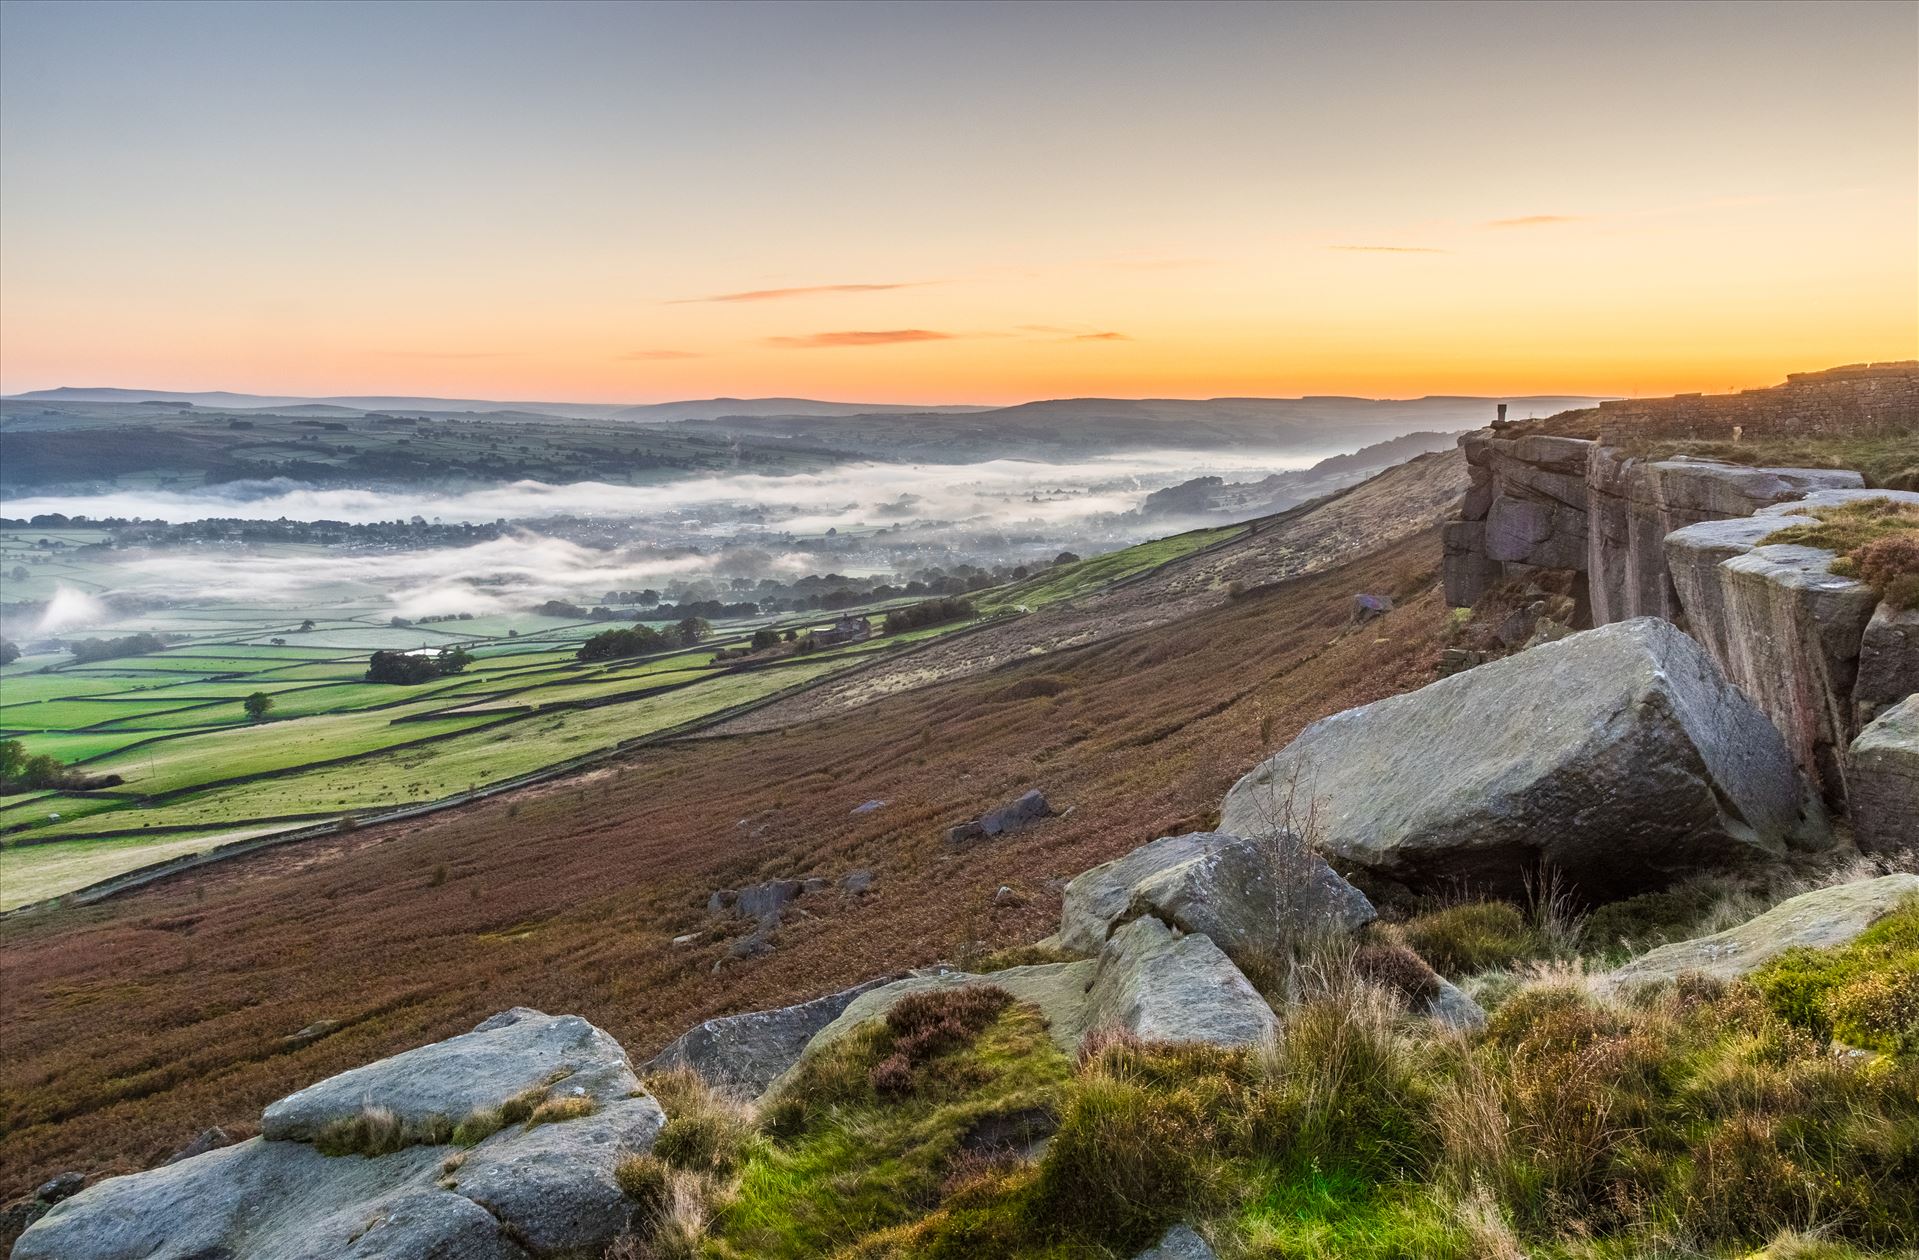 Misty Morning in the Aire Valley View from Cowling Pinnacle (also known as Wainman's Pinnacle)  looking down the Aire Valley towards Lund's Tower.  by Tony Keogh Photography